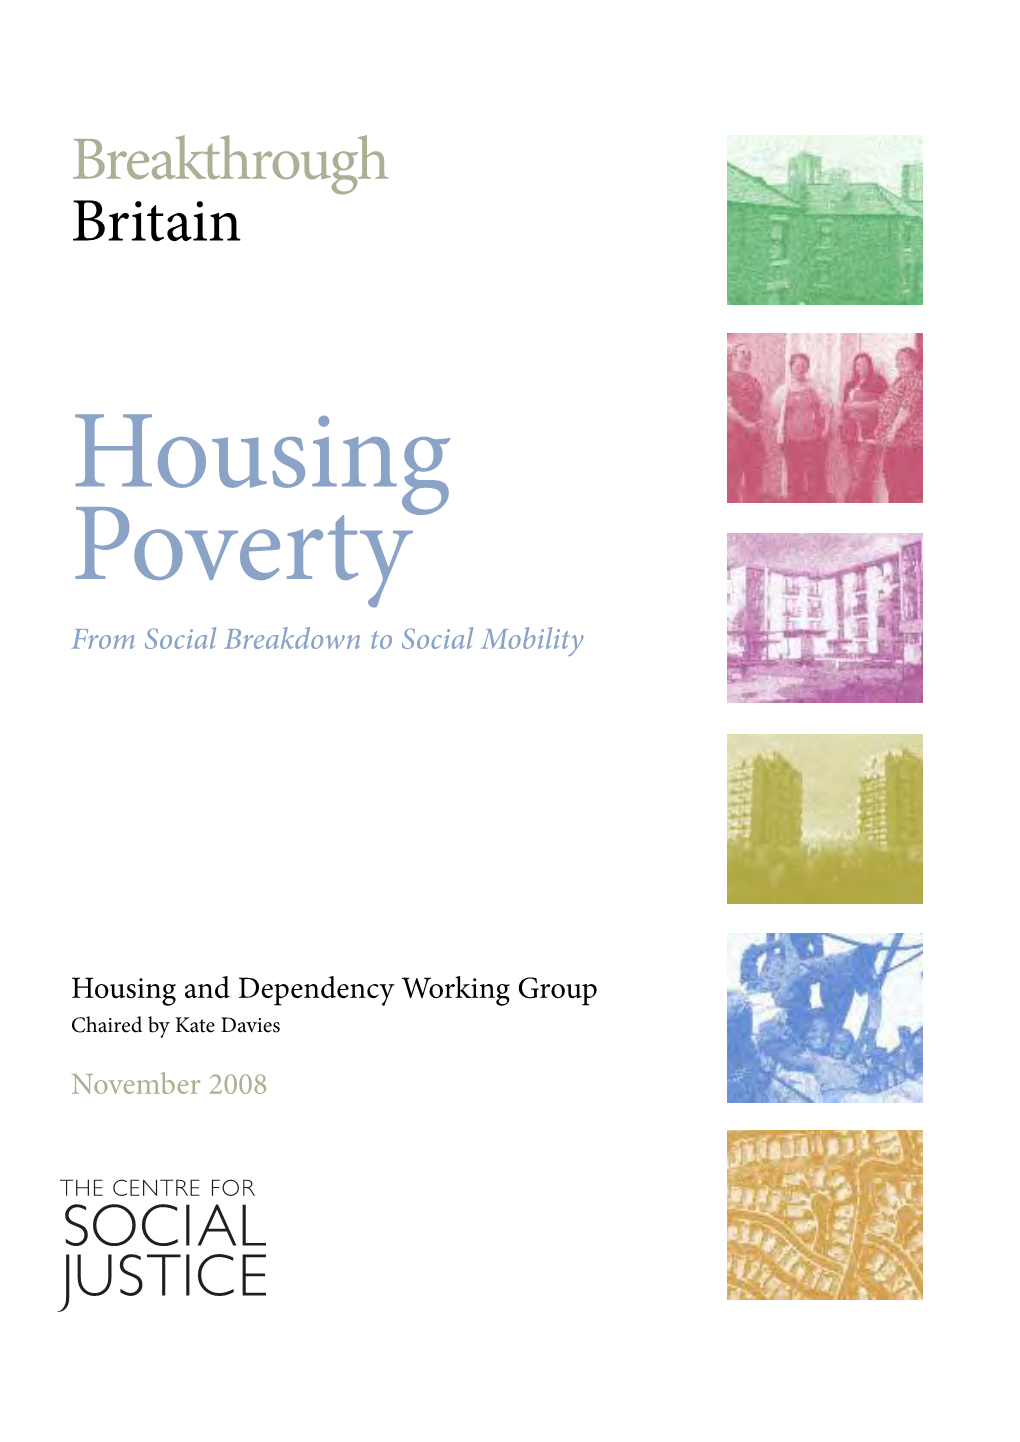 Breakthrough Britain: Housing Poverty © the Centre for Social Justice, 2008